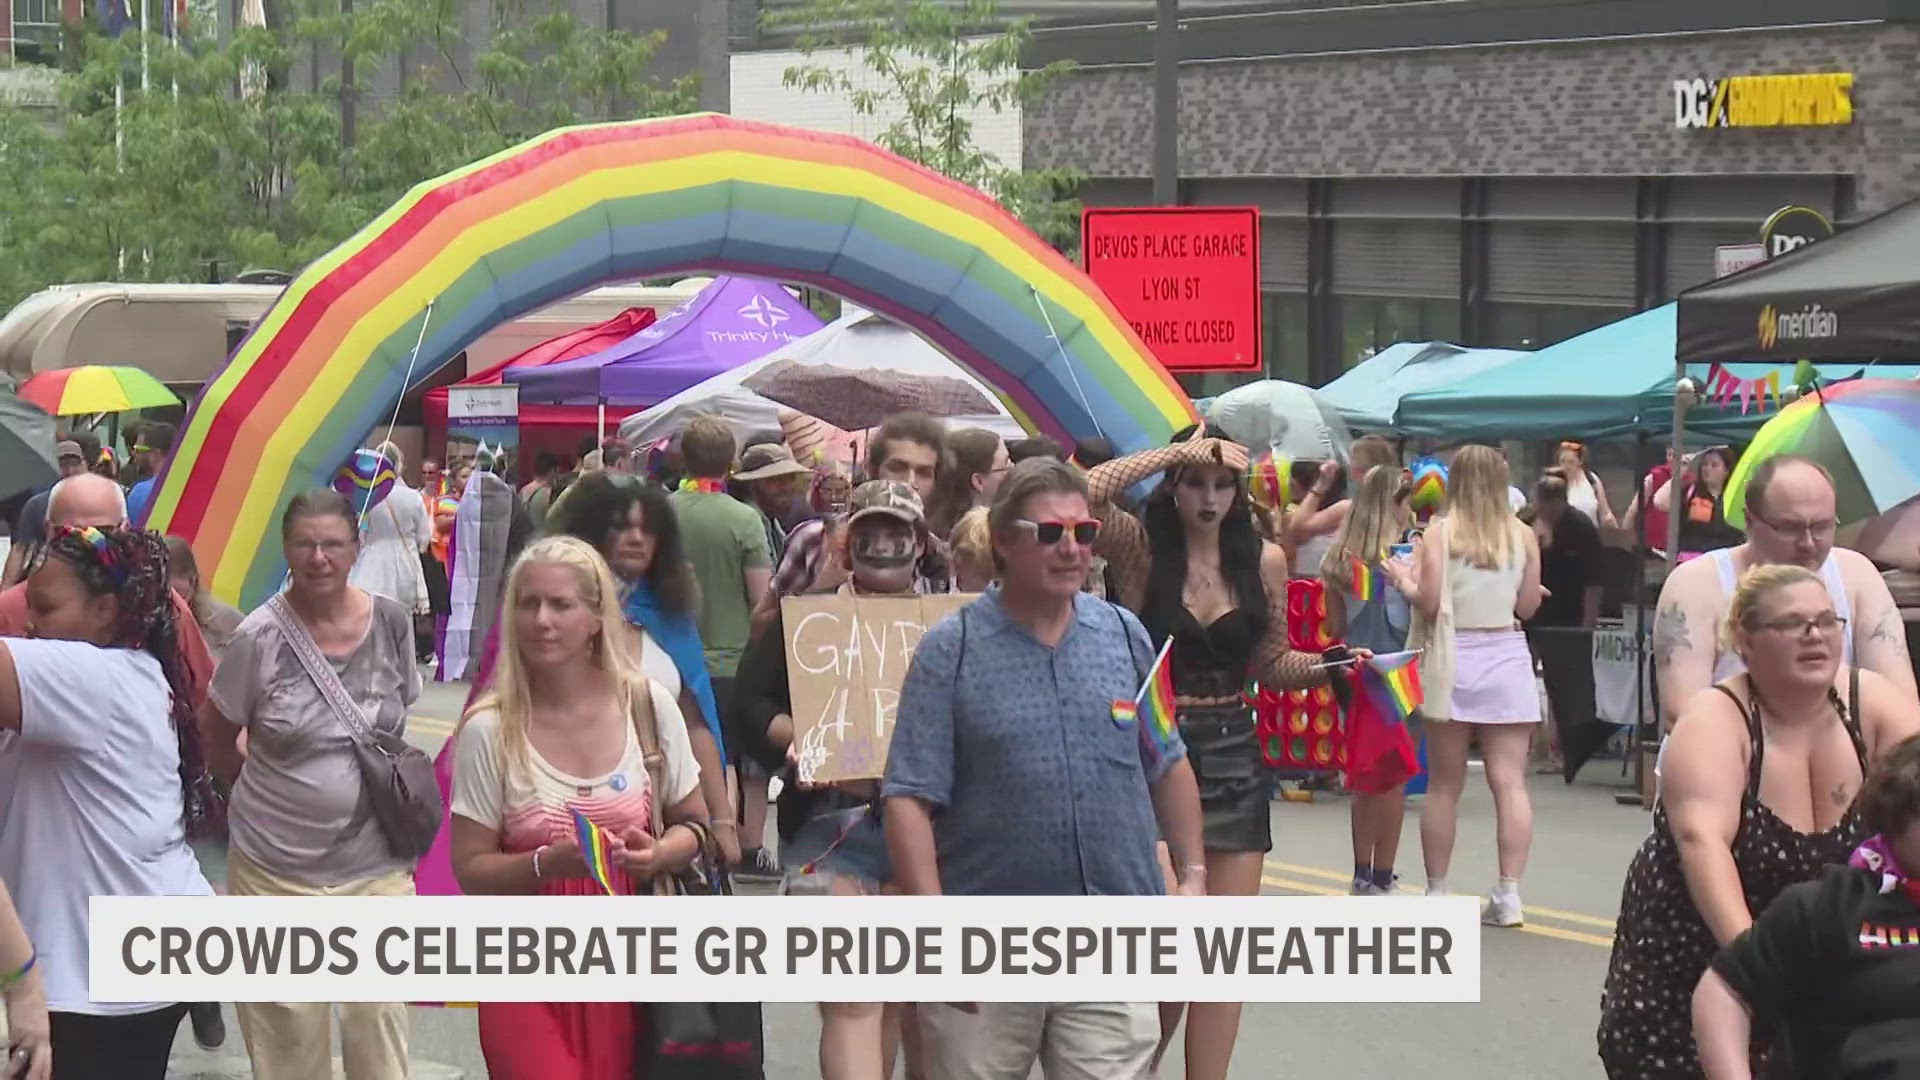 Those who attended GR Pride said the heat, rain and humidity weren't enough to prevent them from coming out and supporting one another.